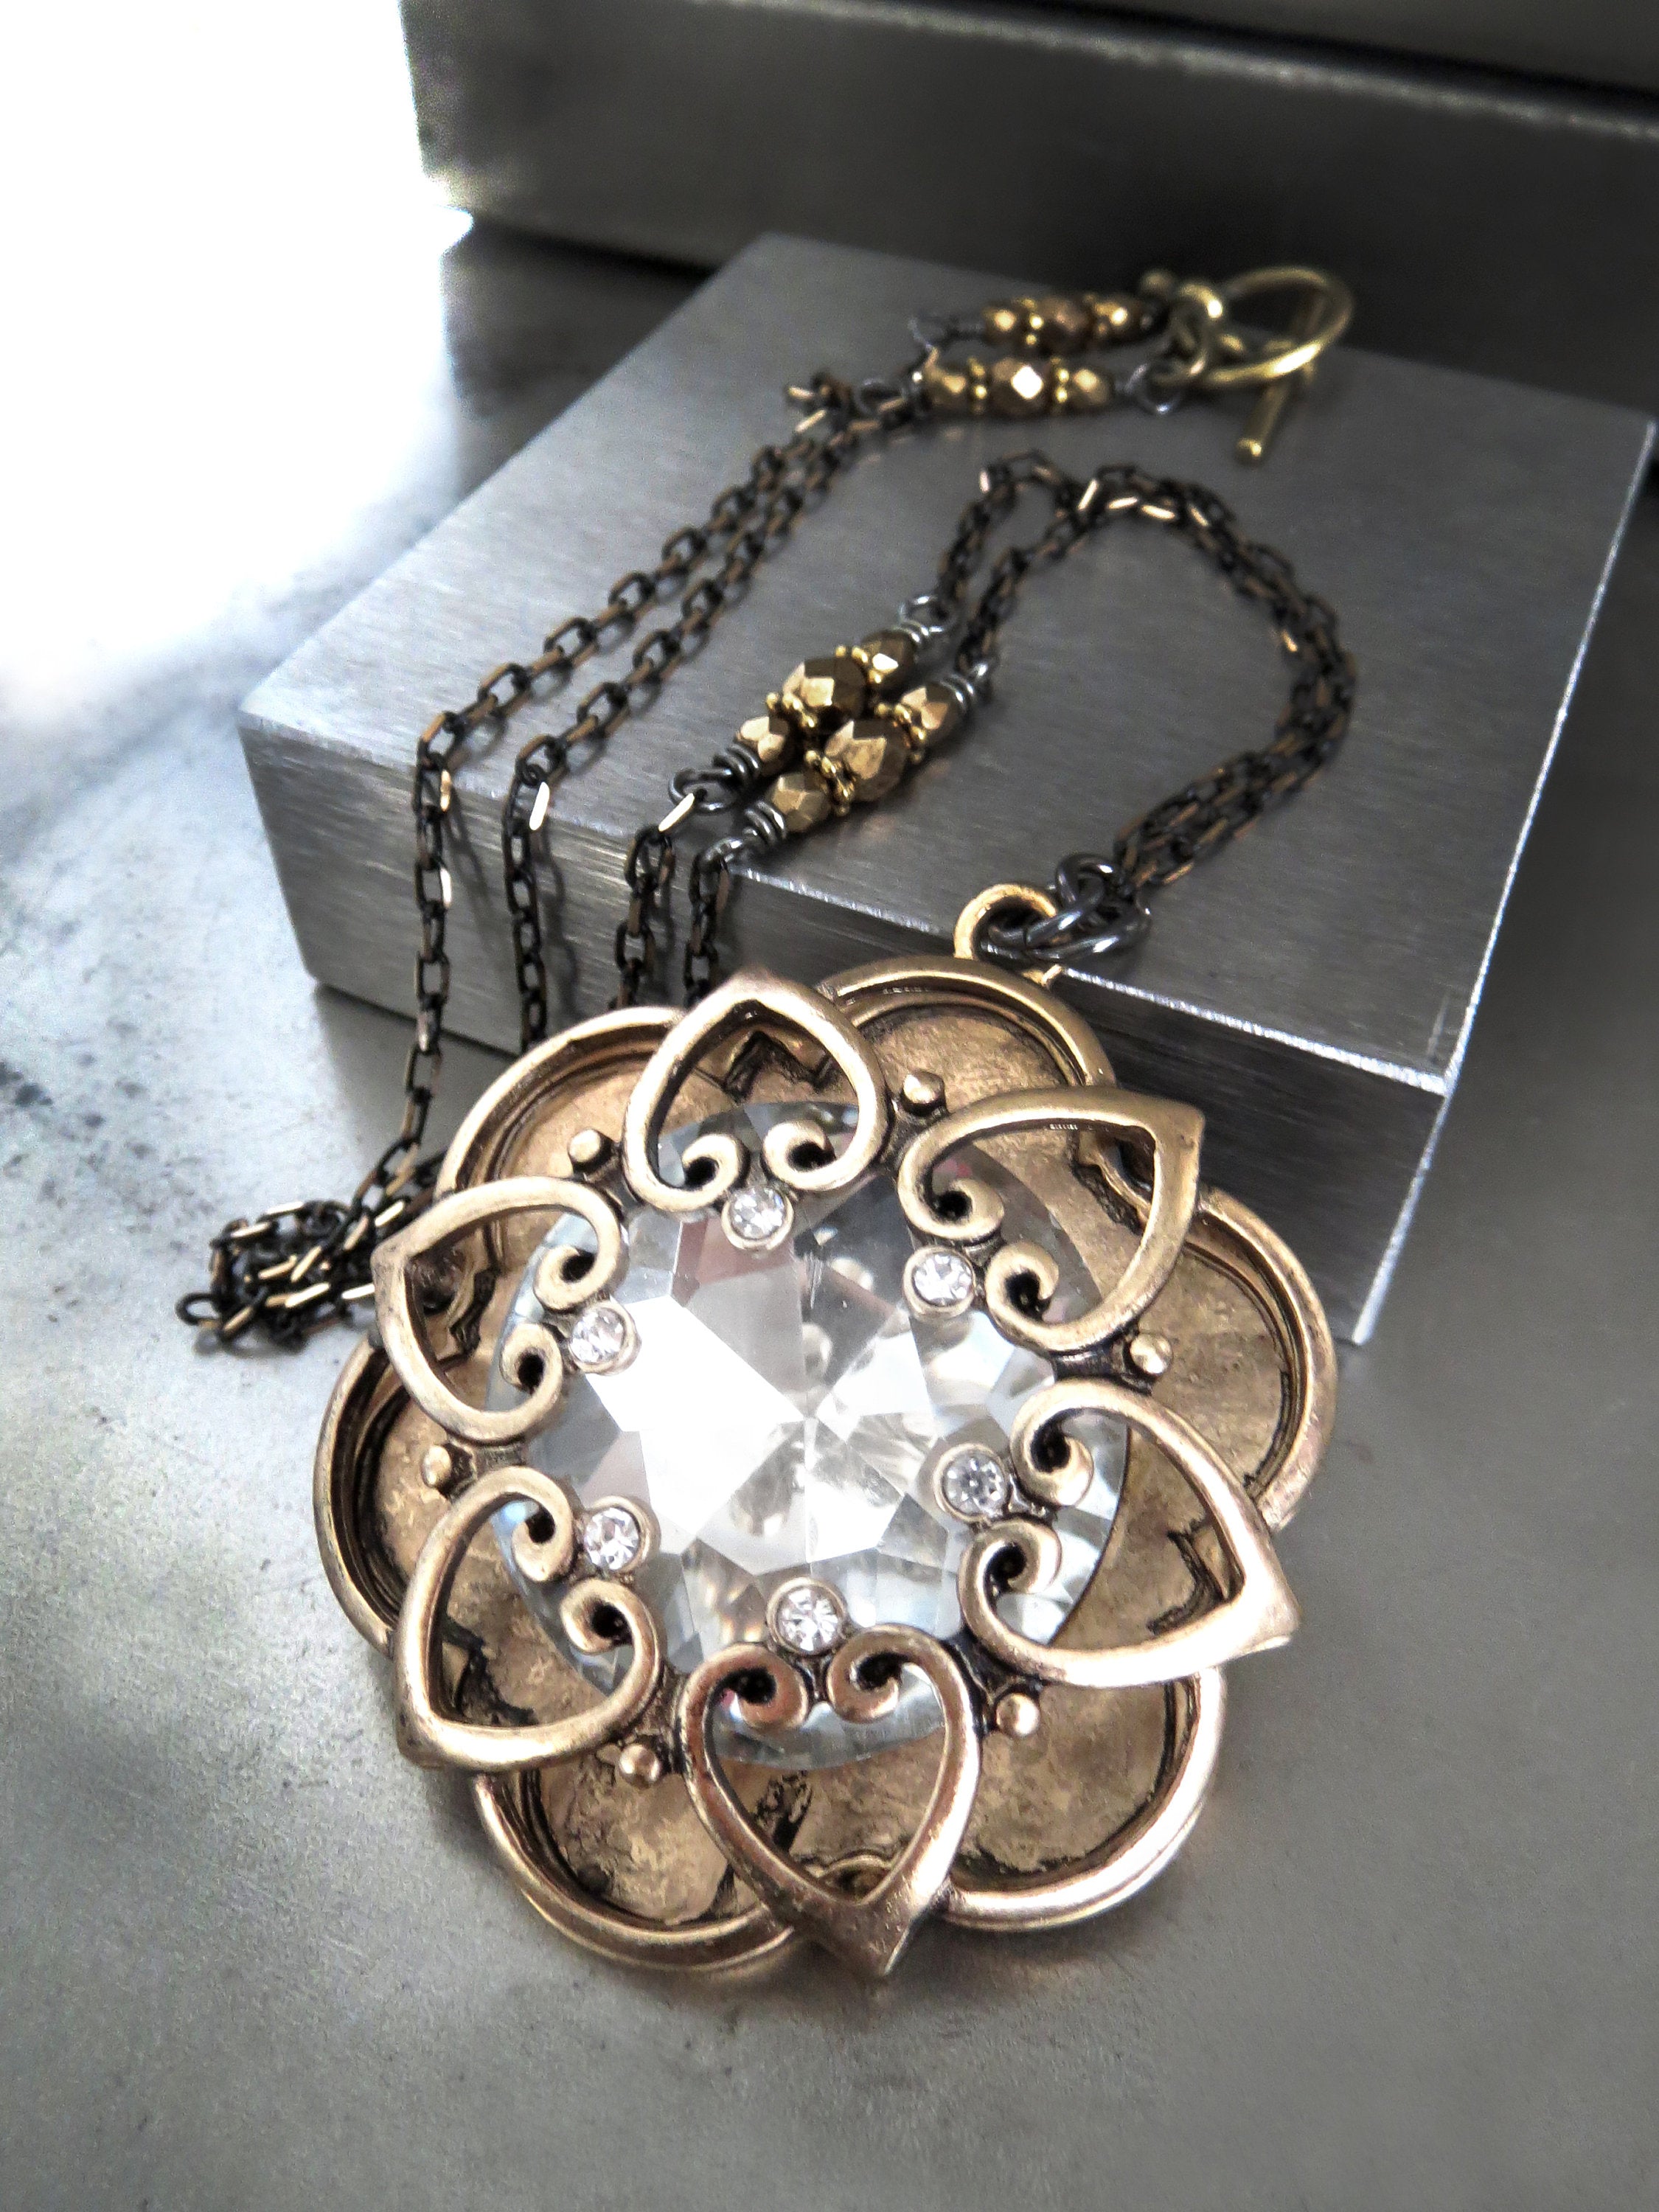 INNER LIGHT - Large Crystal Pendant with Antique Gold Mandala Cage on Black-Gold Chain, Romantic Jewelry for New Years Eve, Valentines Day